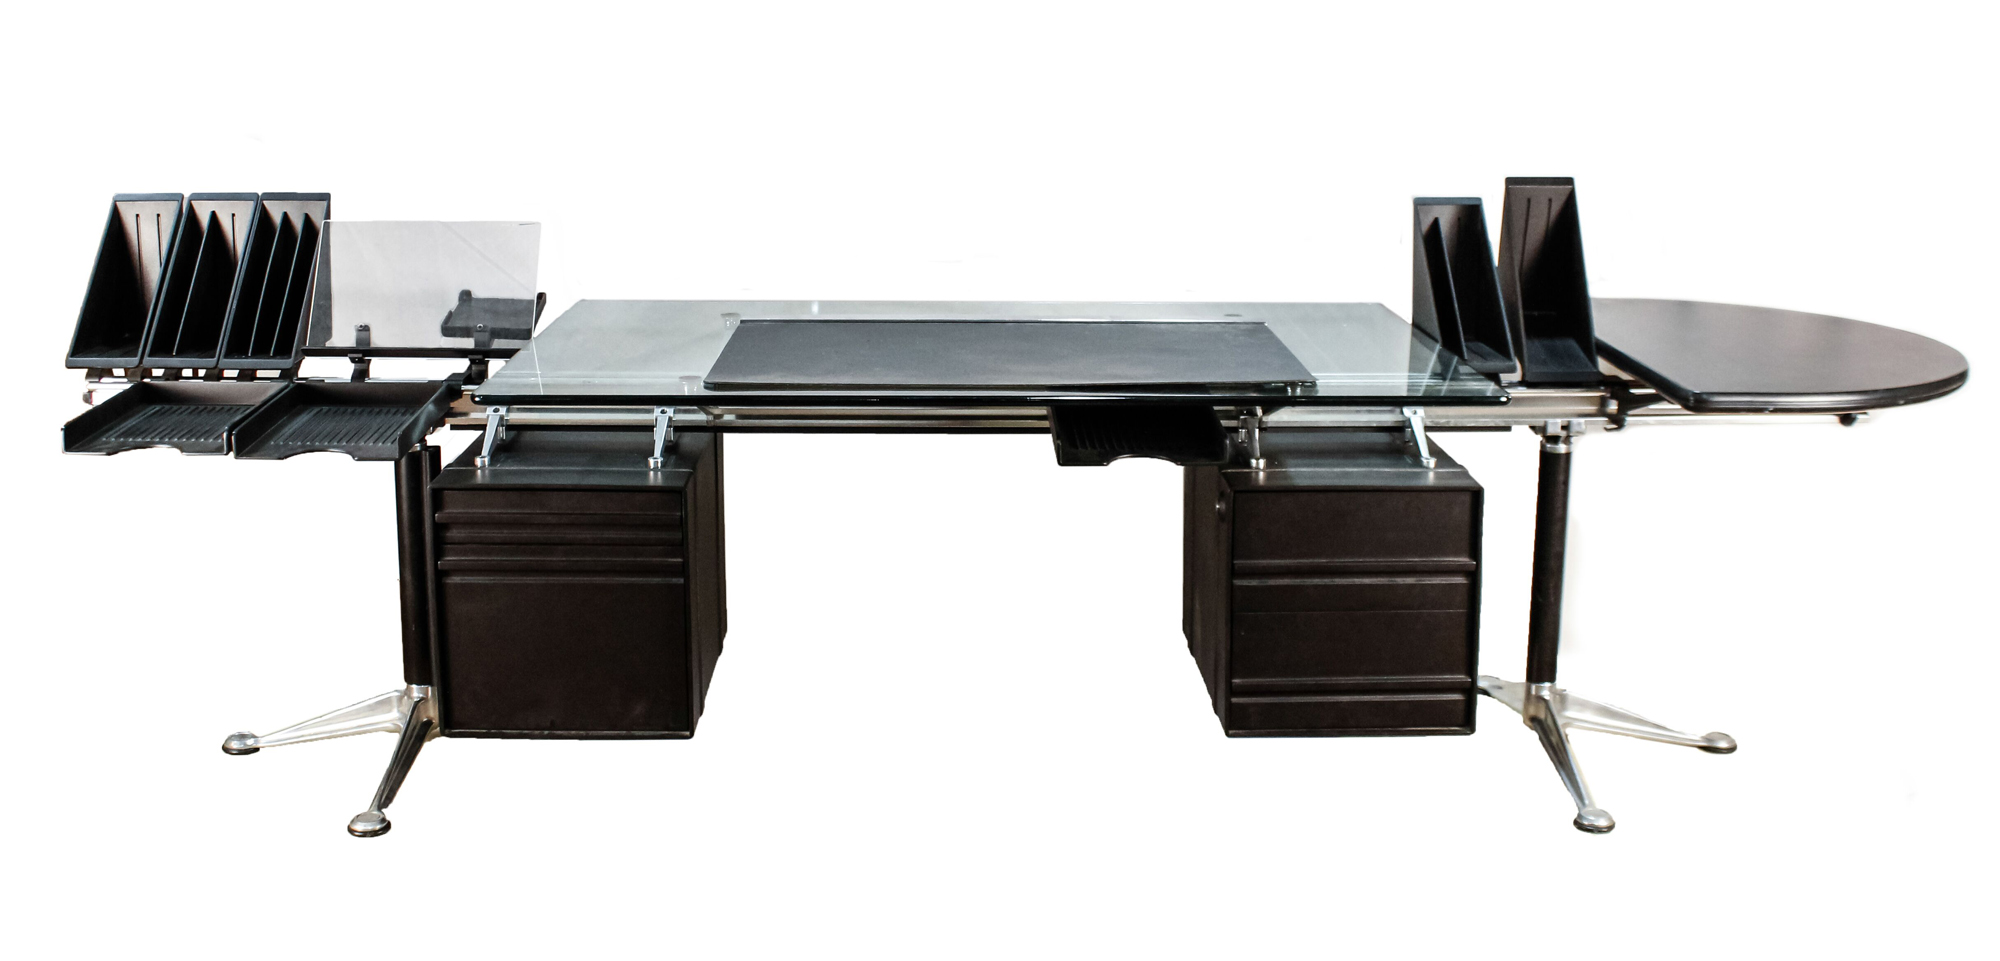 Bruce Burdick work station desk made during the 1970s for Herman Miller, with the 10-foot polished aluminum beam mounted to the top and bottom. Ahledrs & Ogletree image.